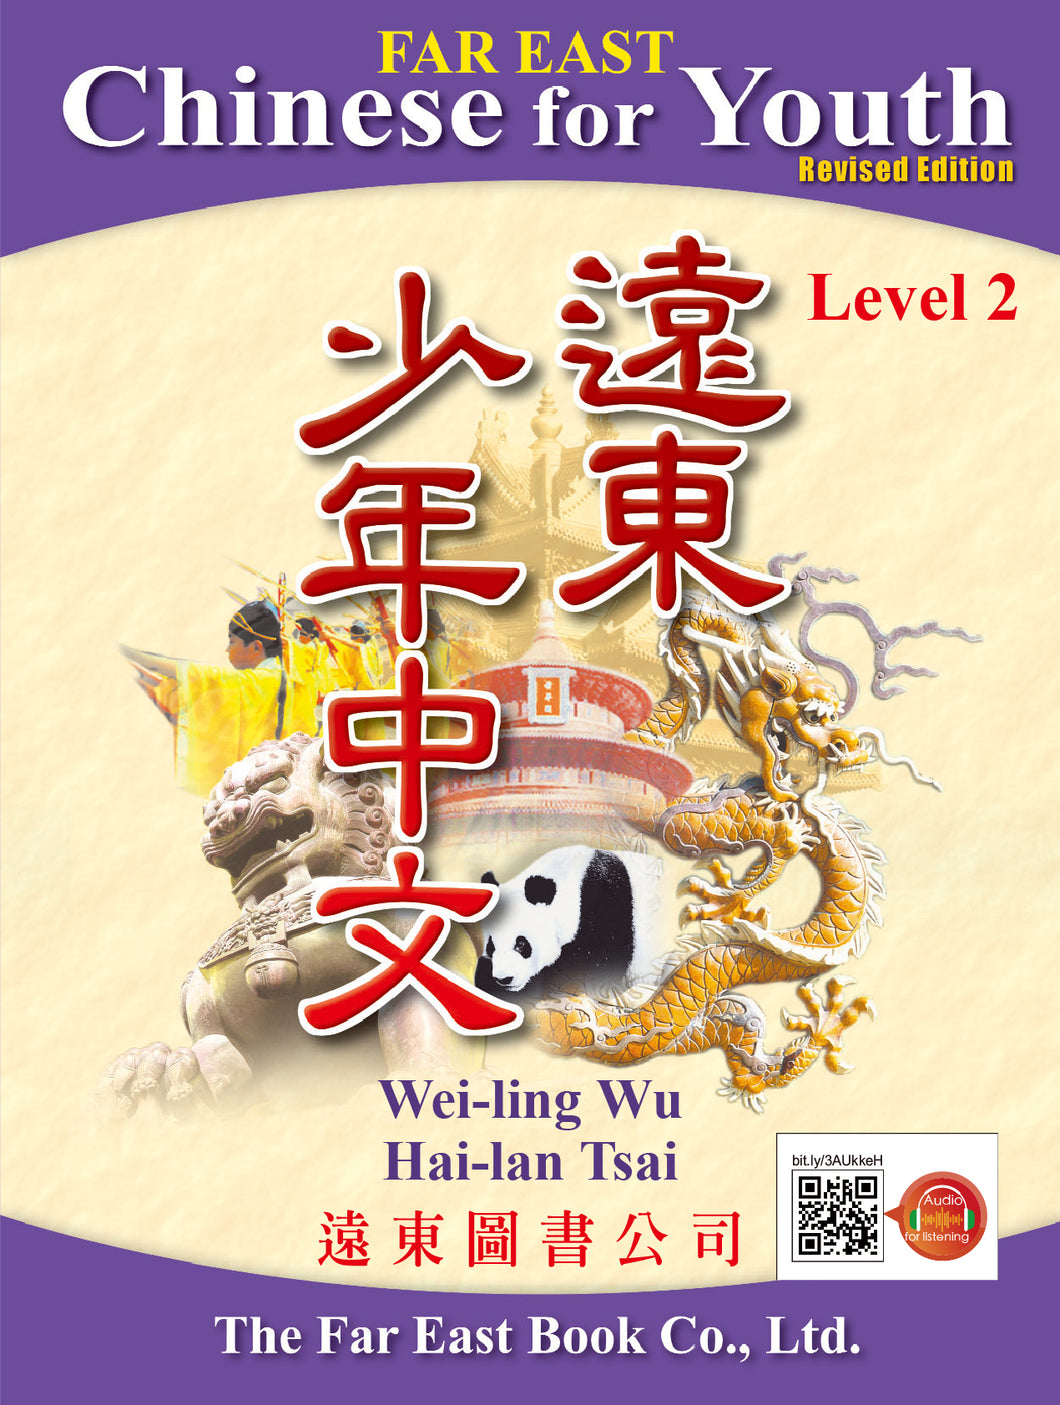 Far East Chinese for Youth Level 2 (Revised Edition) Textbook (Audio for listening)遠東少年中文 (第二冊) (修訂版) (課本) (線上音檔版)